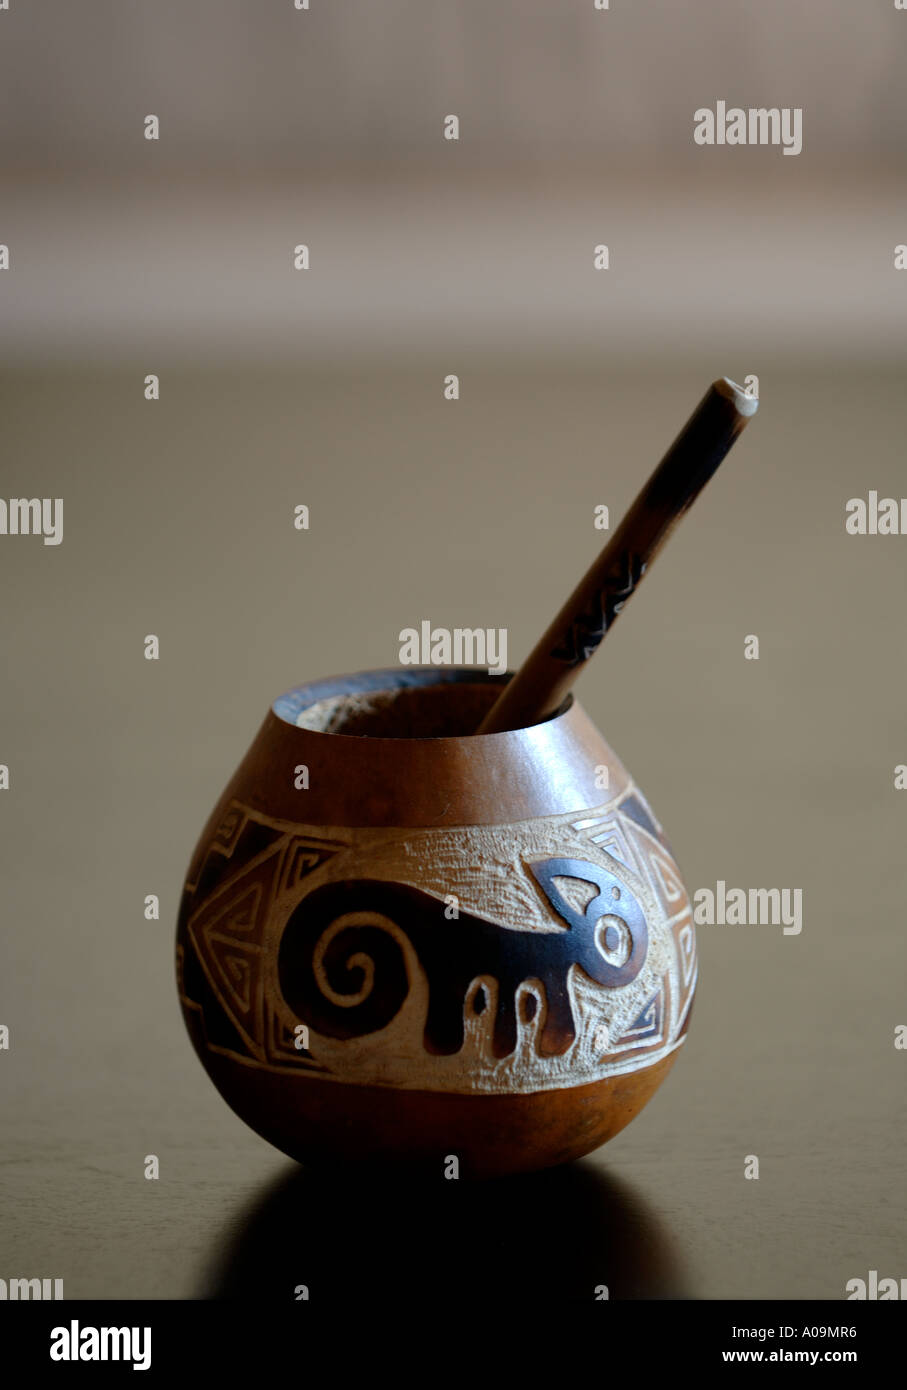 Handcrafted mate gourd and straw Stock Photo